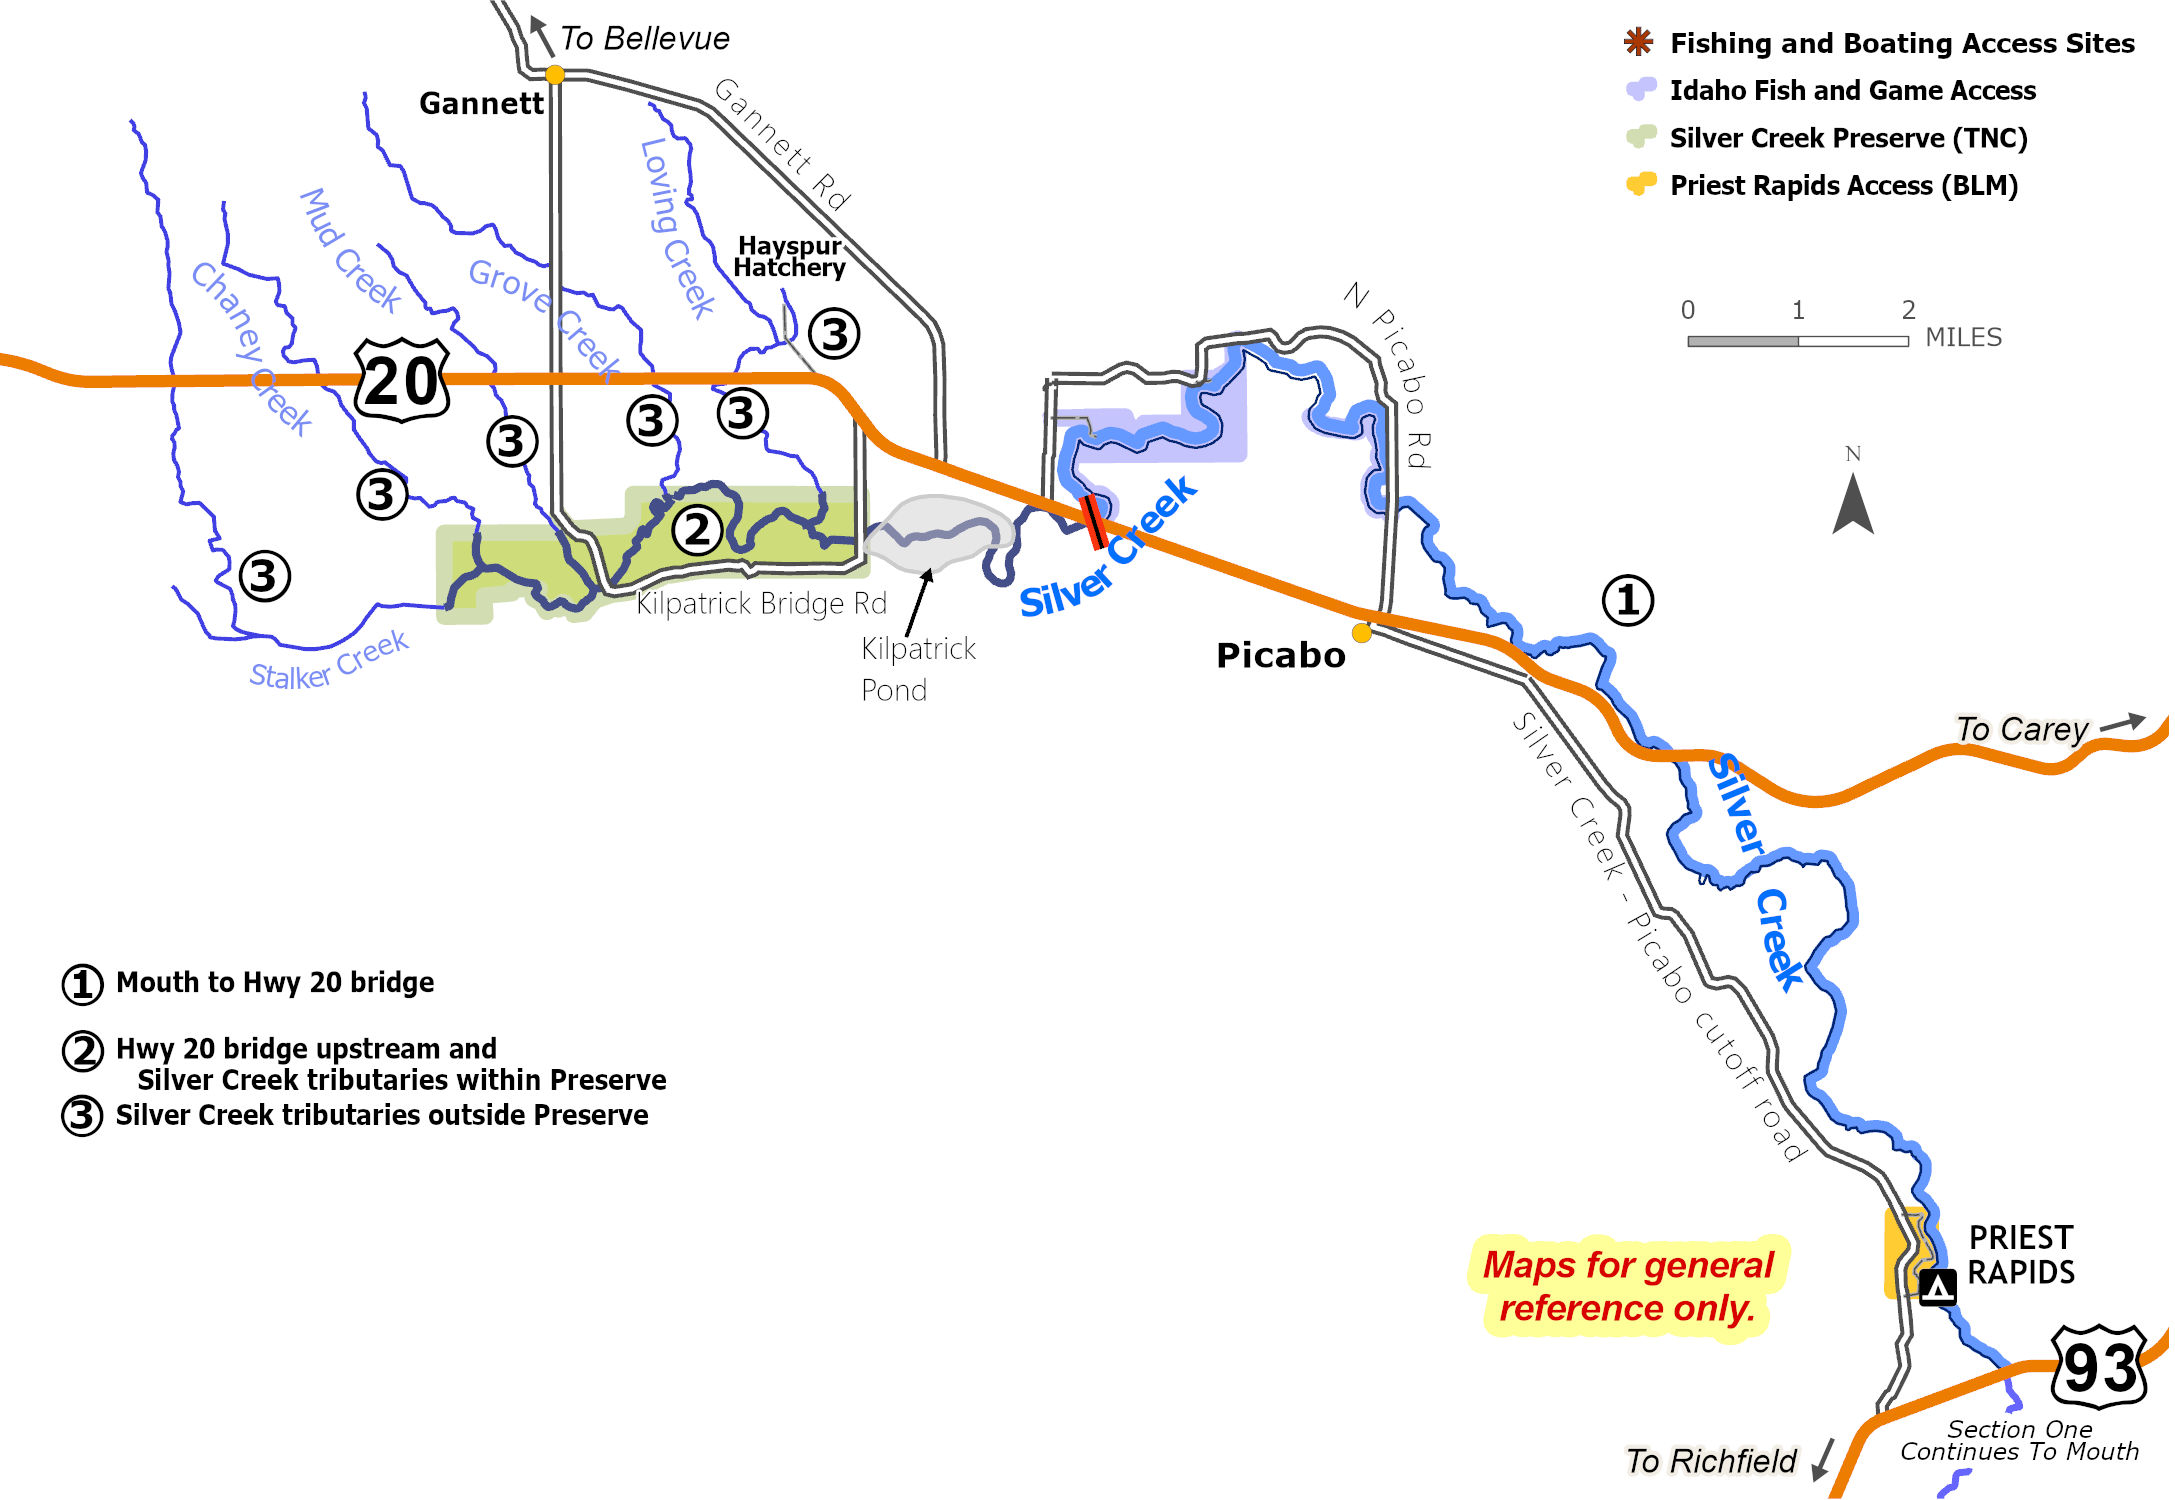 Silver Creek proposal map: Indicates different sections discussed in the proposal